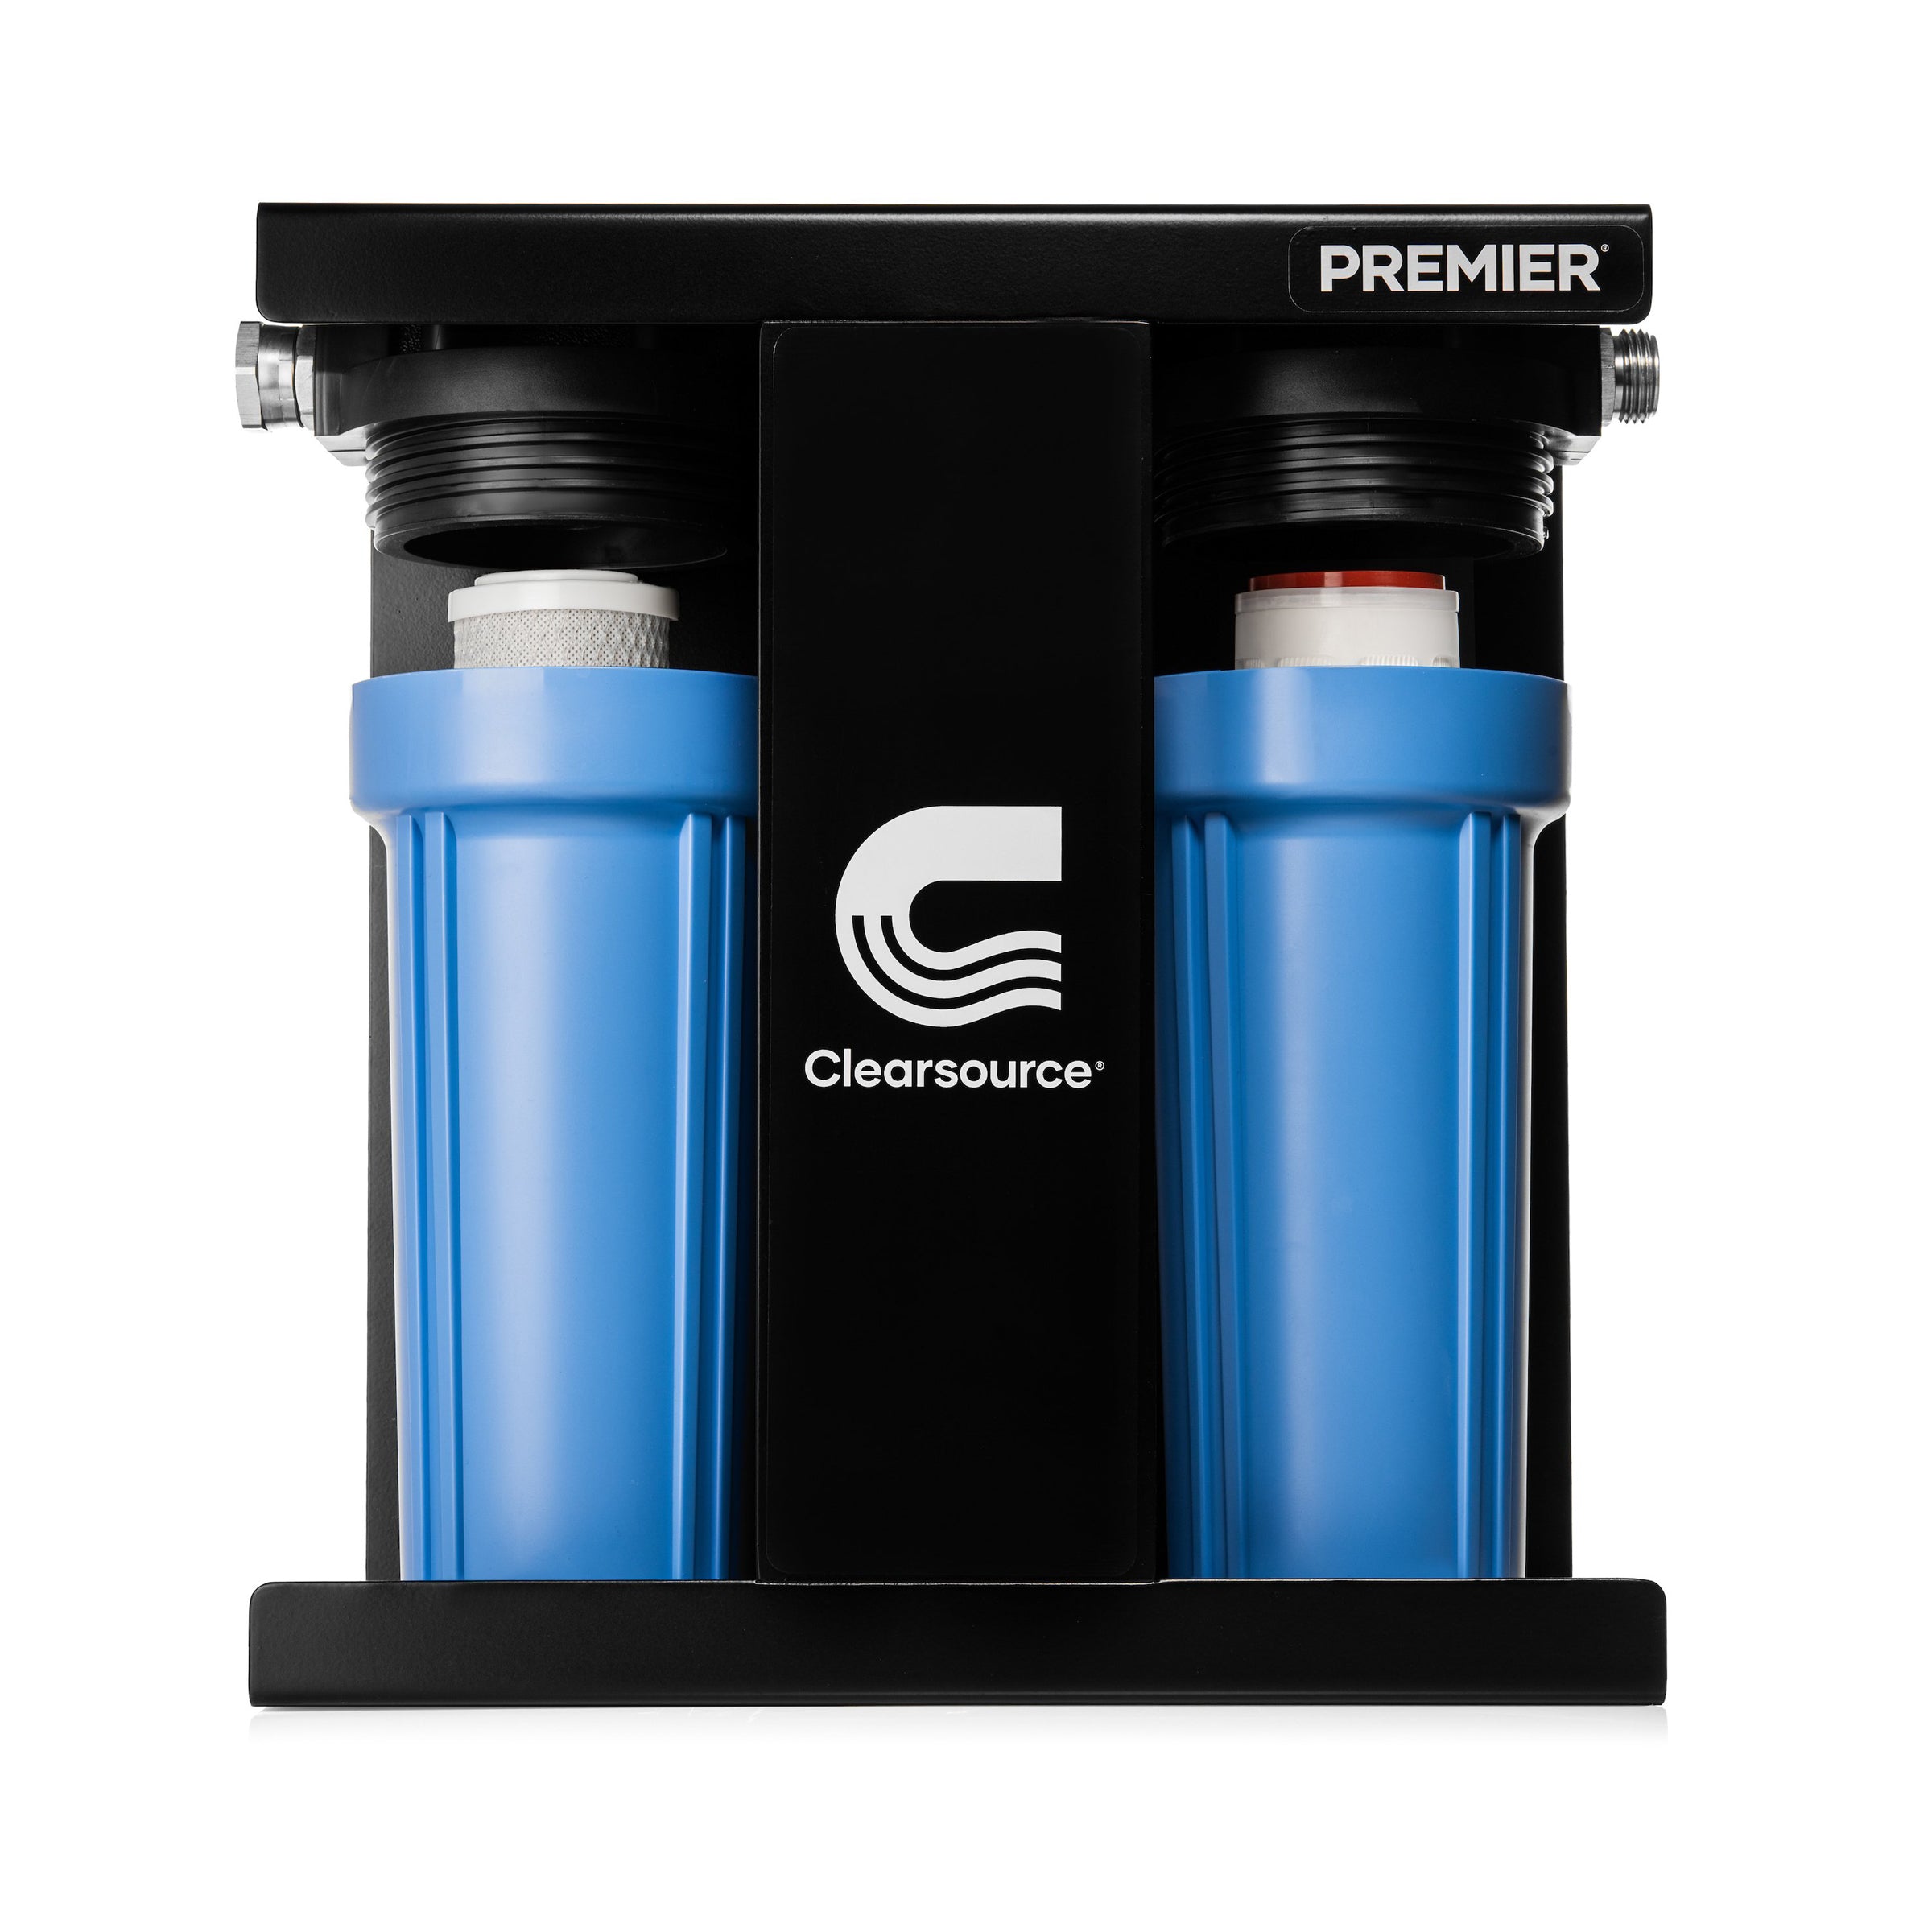 Clearsource Preimer RV Water Filter System - 0.2 Micron Filtration!